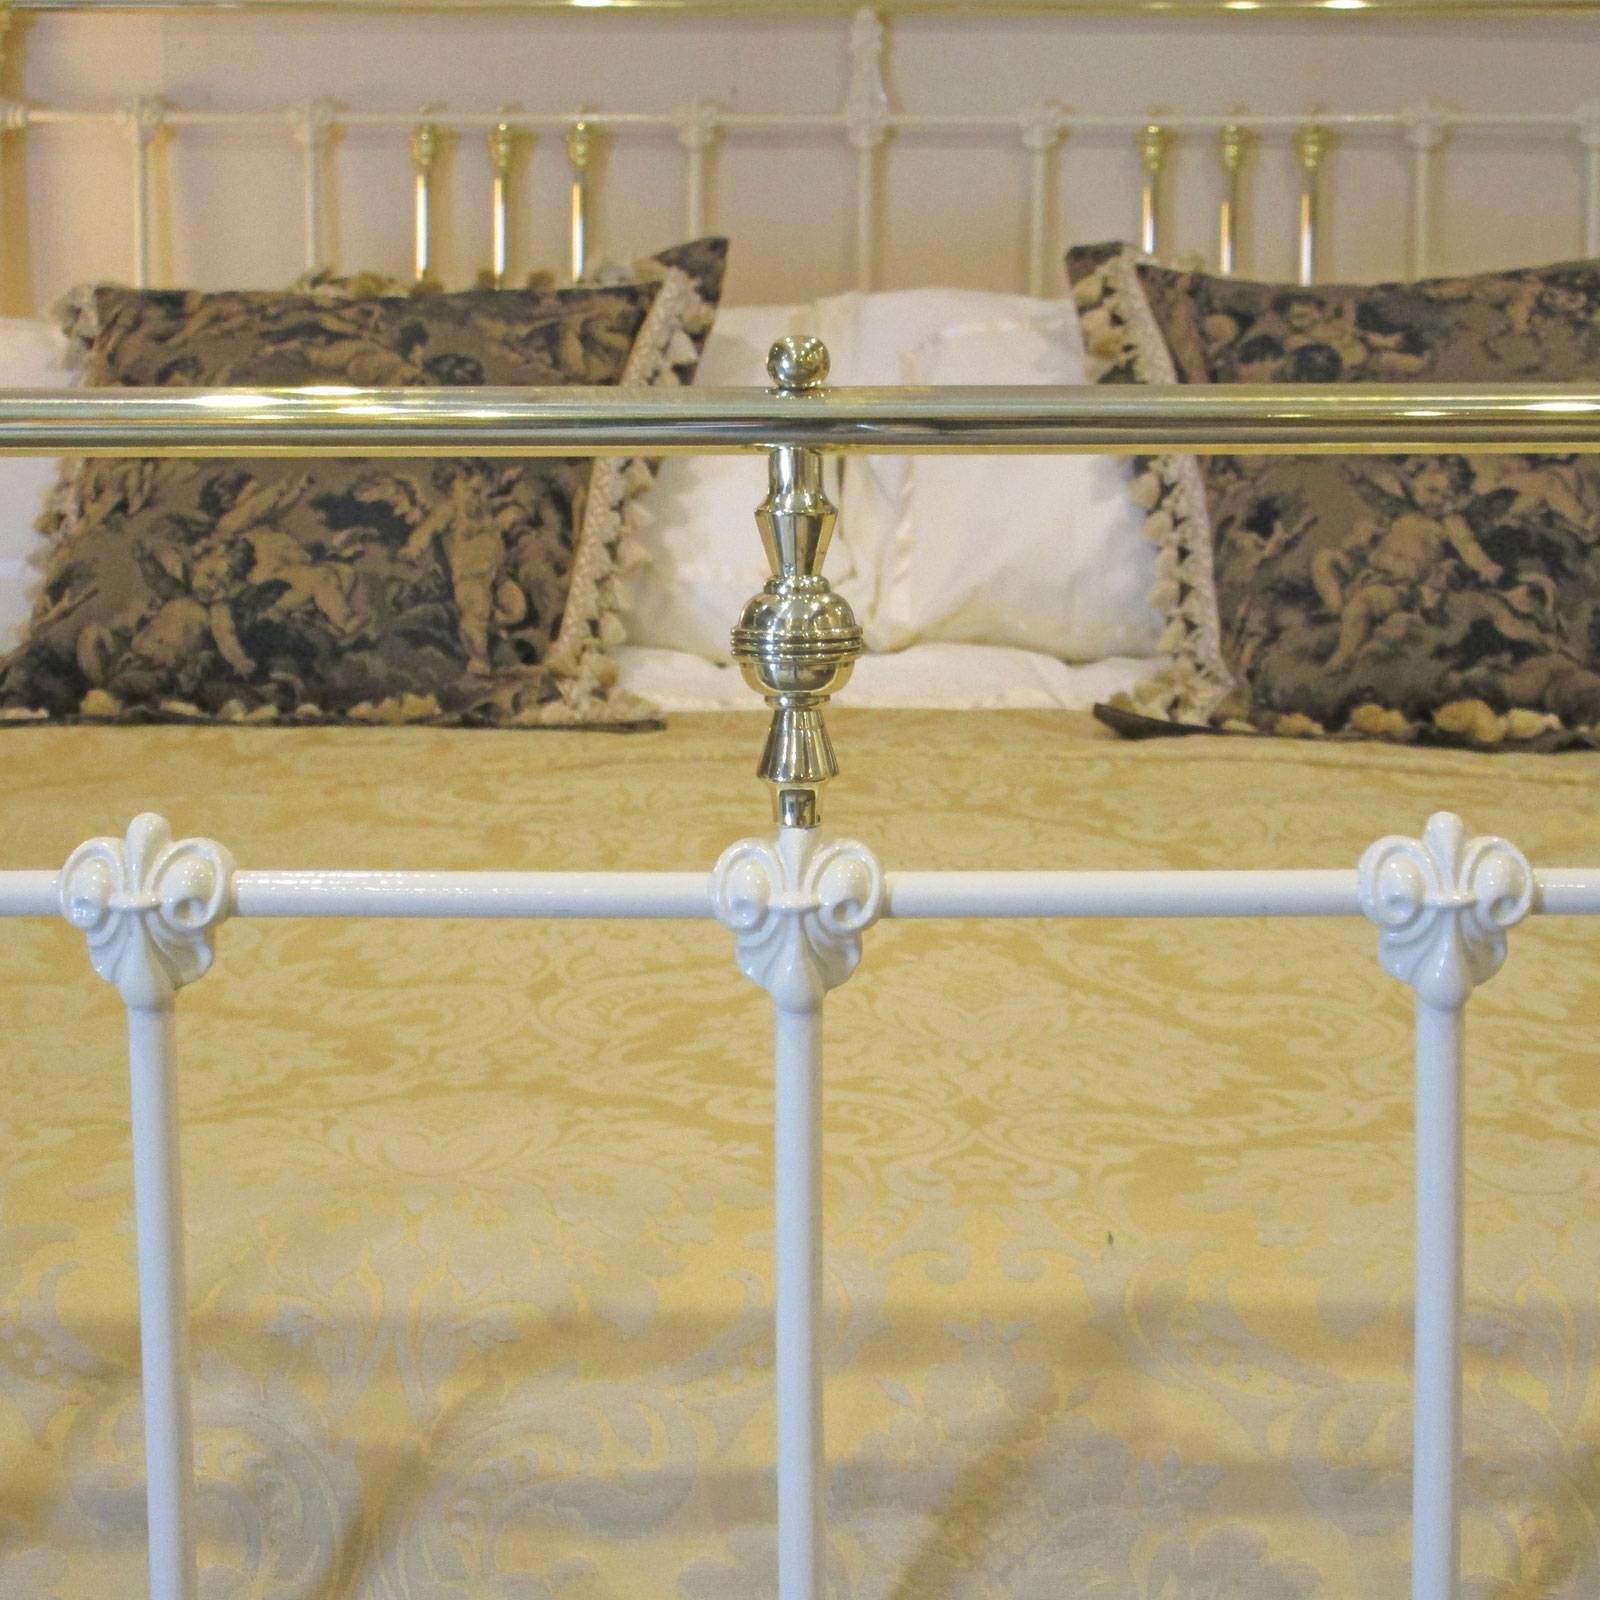 A decorative Victorian bed adapted from an original frame with brass top rails, knee caps and bars, circa 1890.

This bed accepts a British super king or Californian King (72 in wide) base and mattress set.

The price is for the bedstead alone,